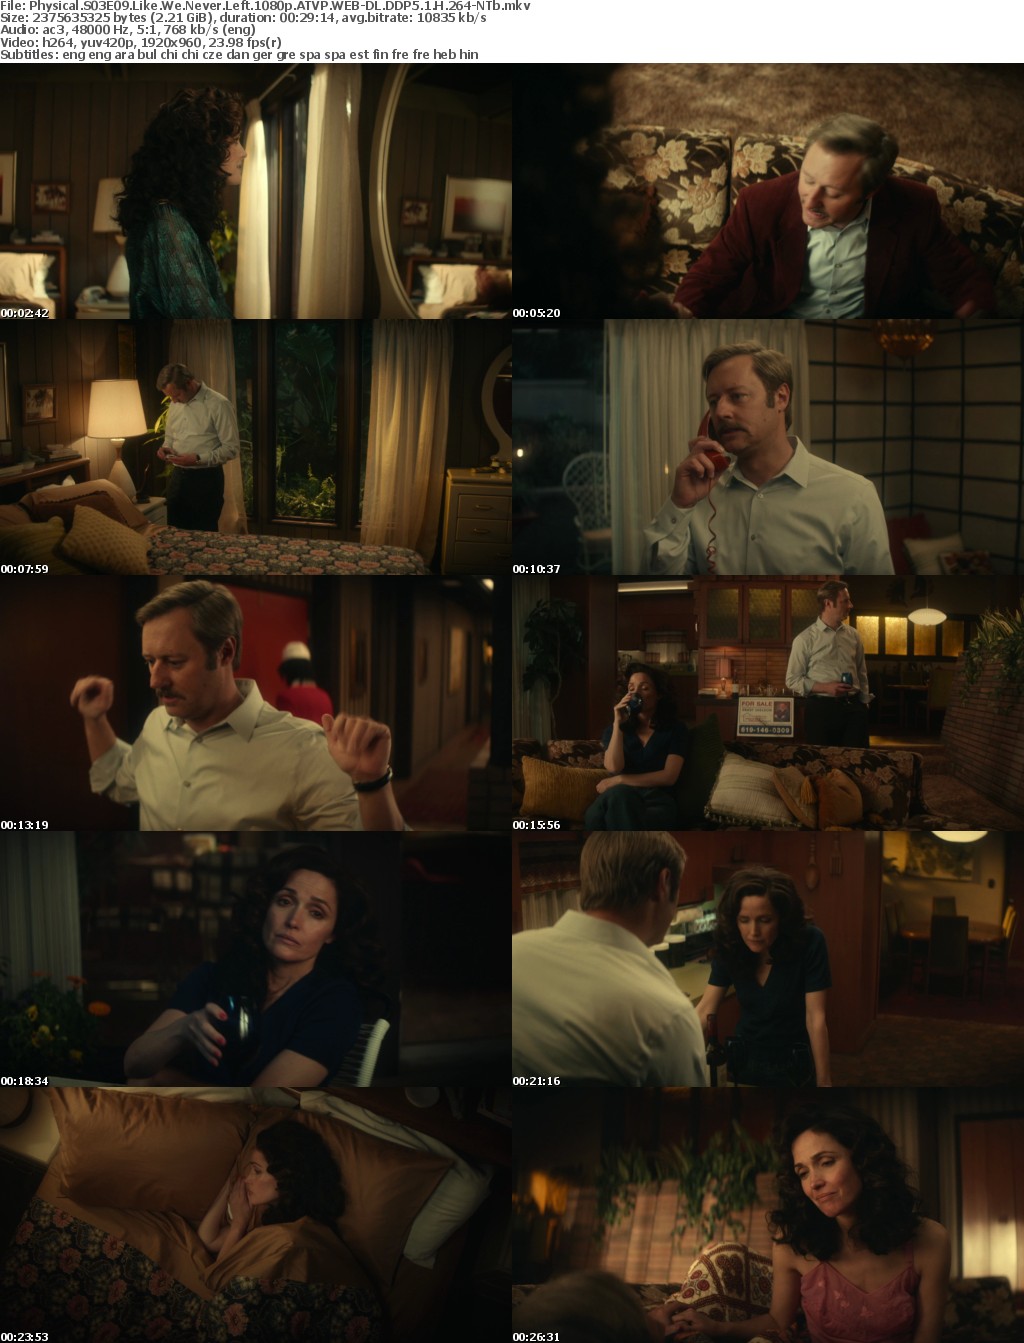 Physical S03E09 Like We Never Left 1080p ATVP WEB-DL DDP5 1 H 264-NTb